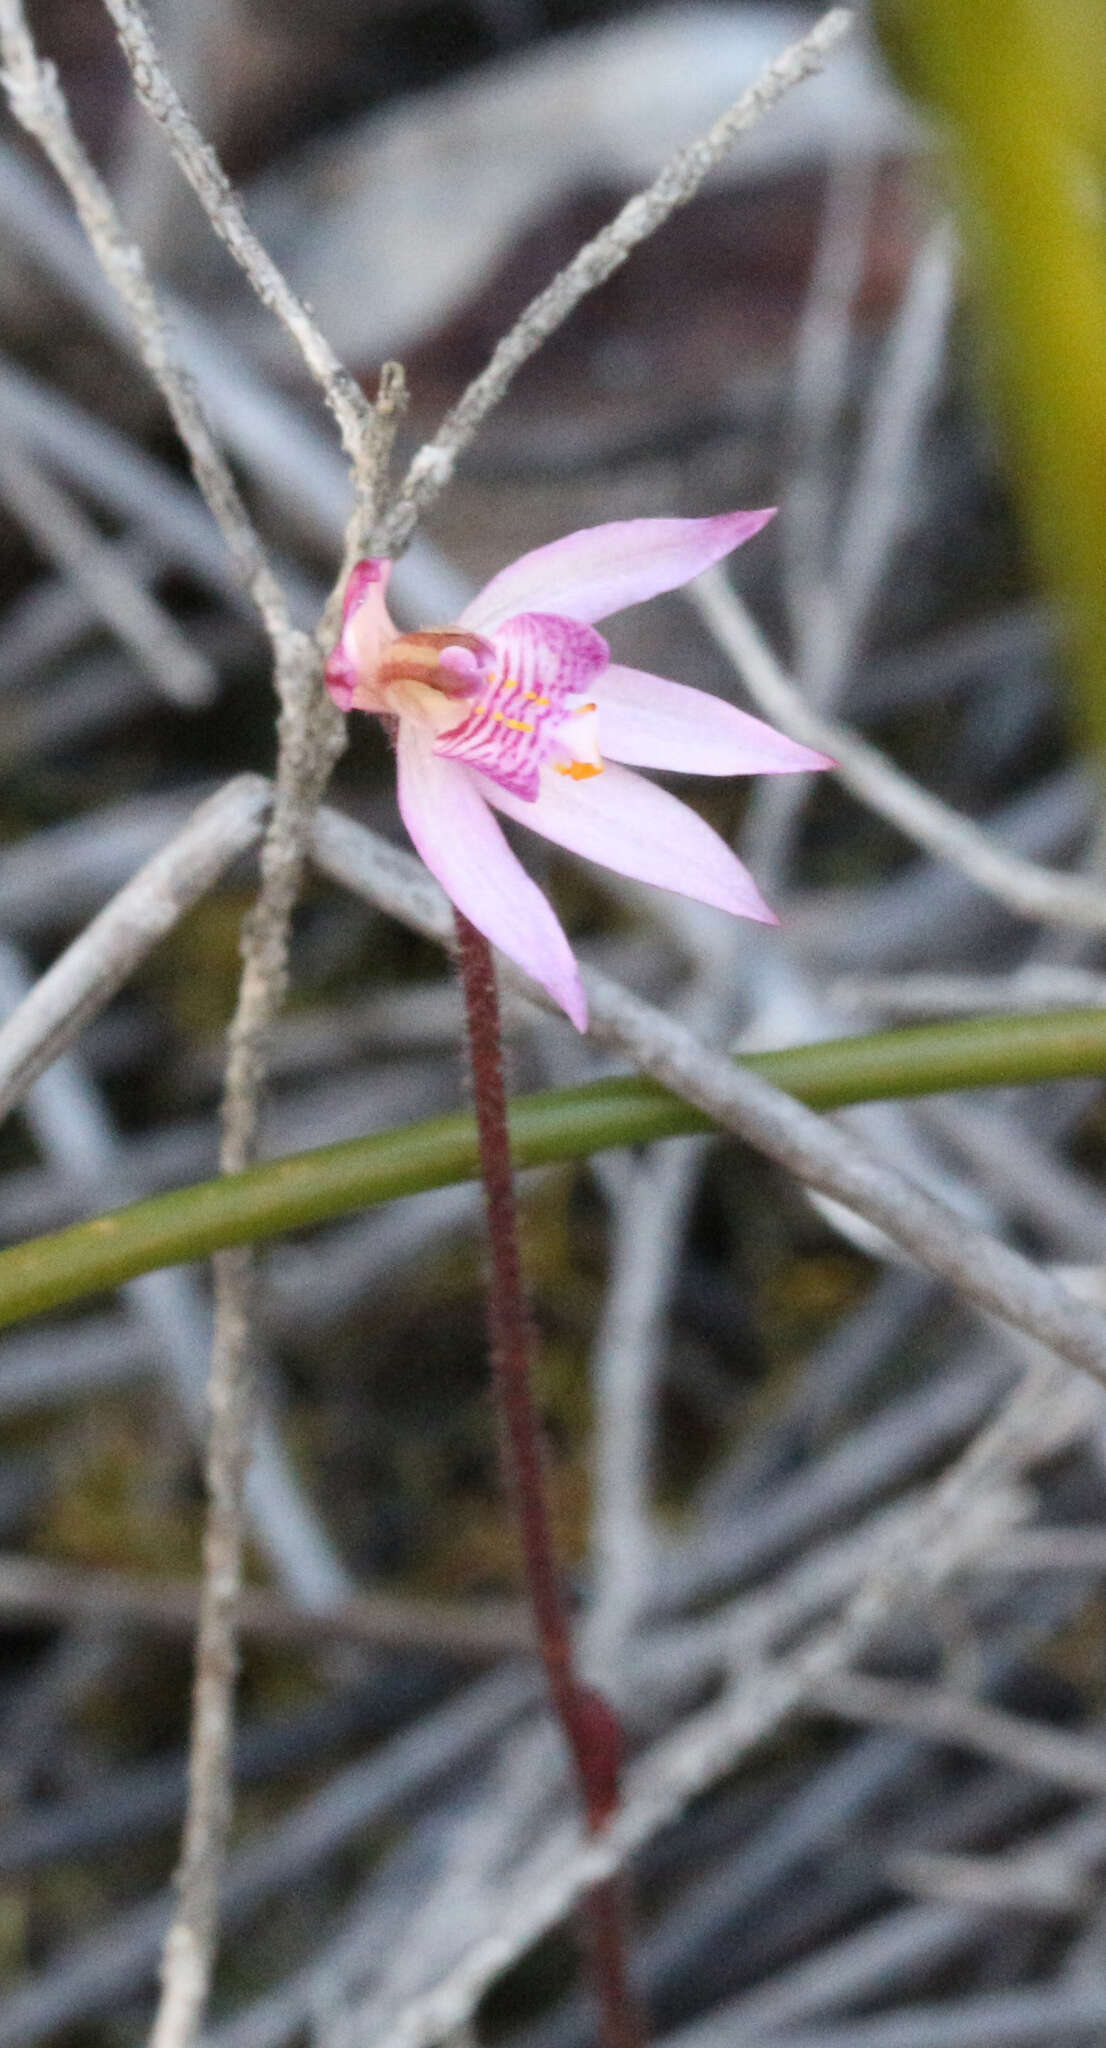 Image of Fairy orchid